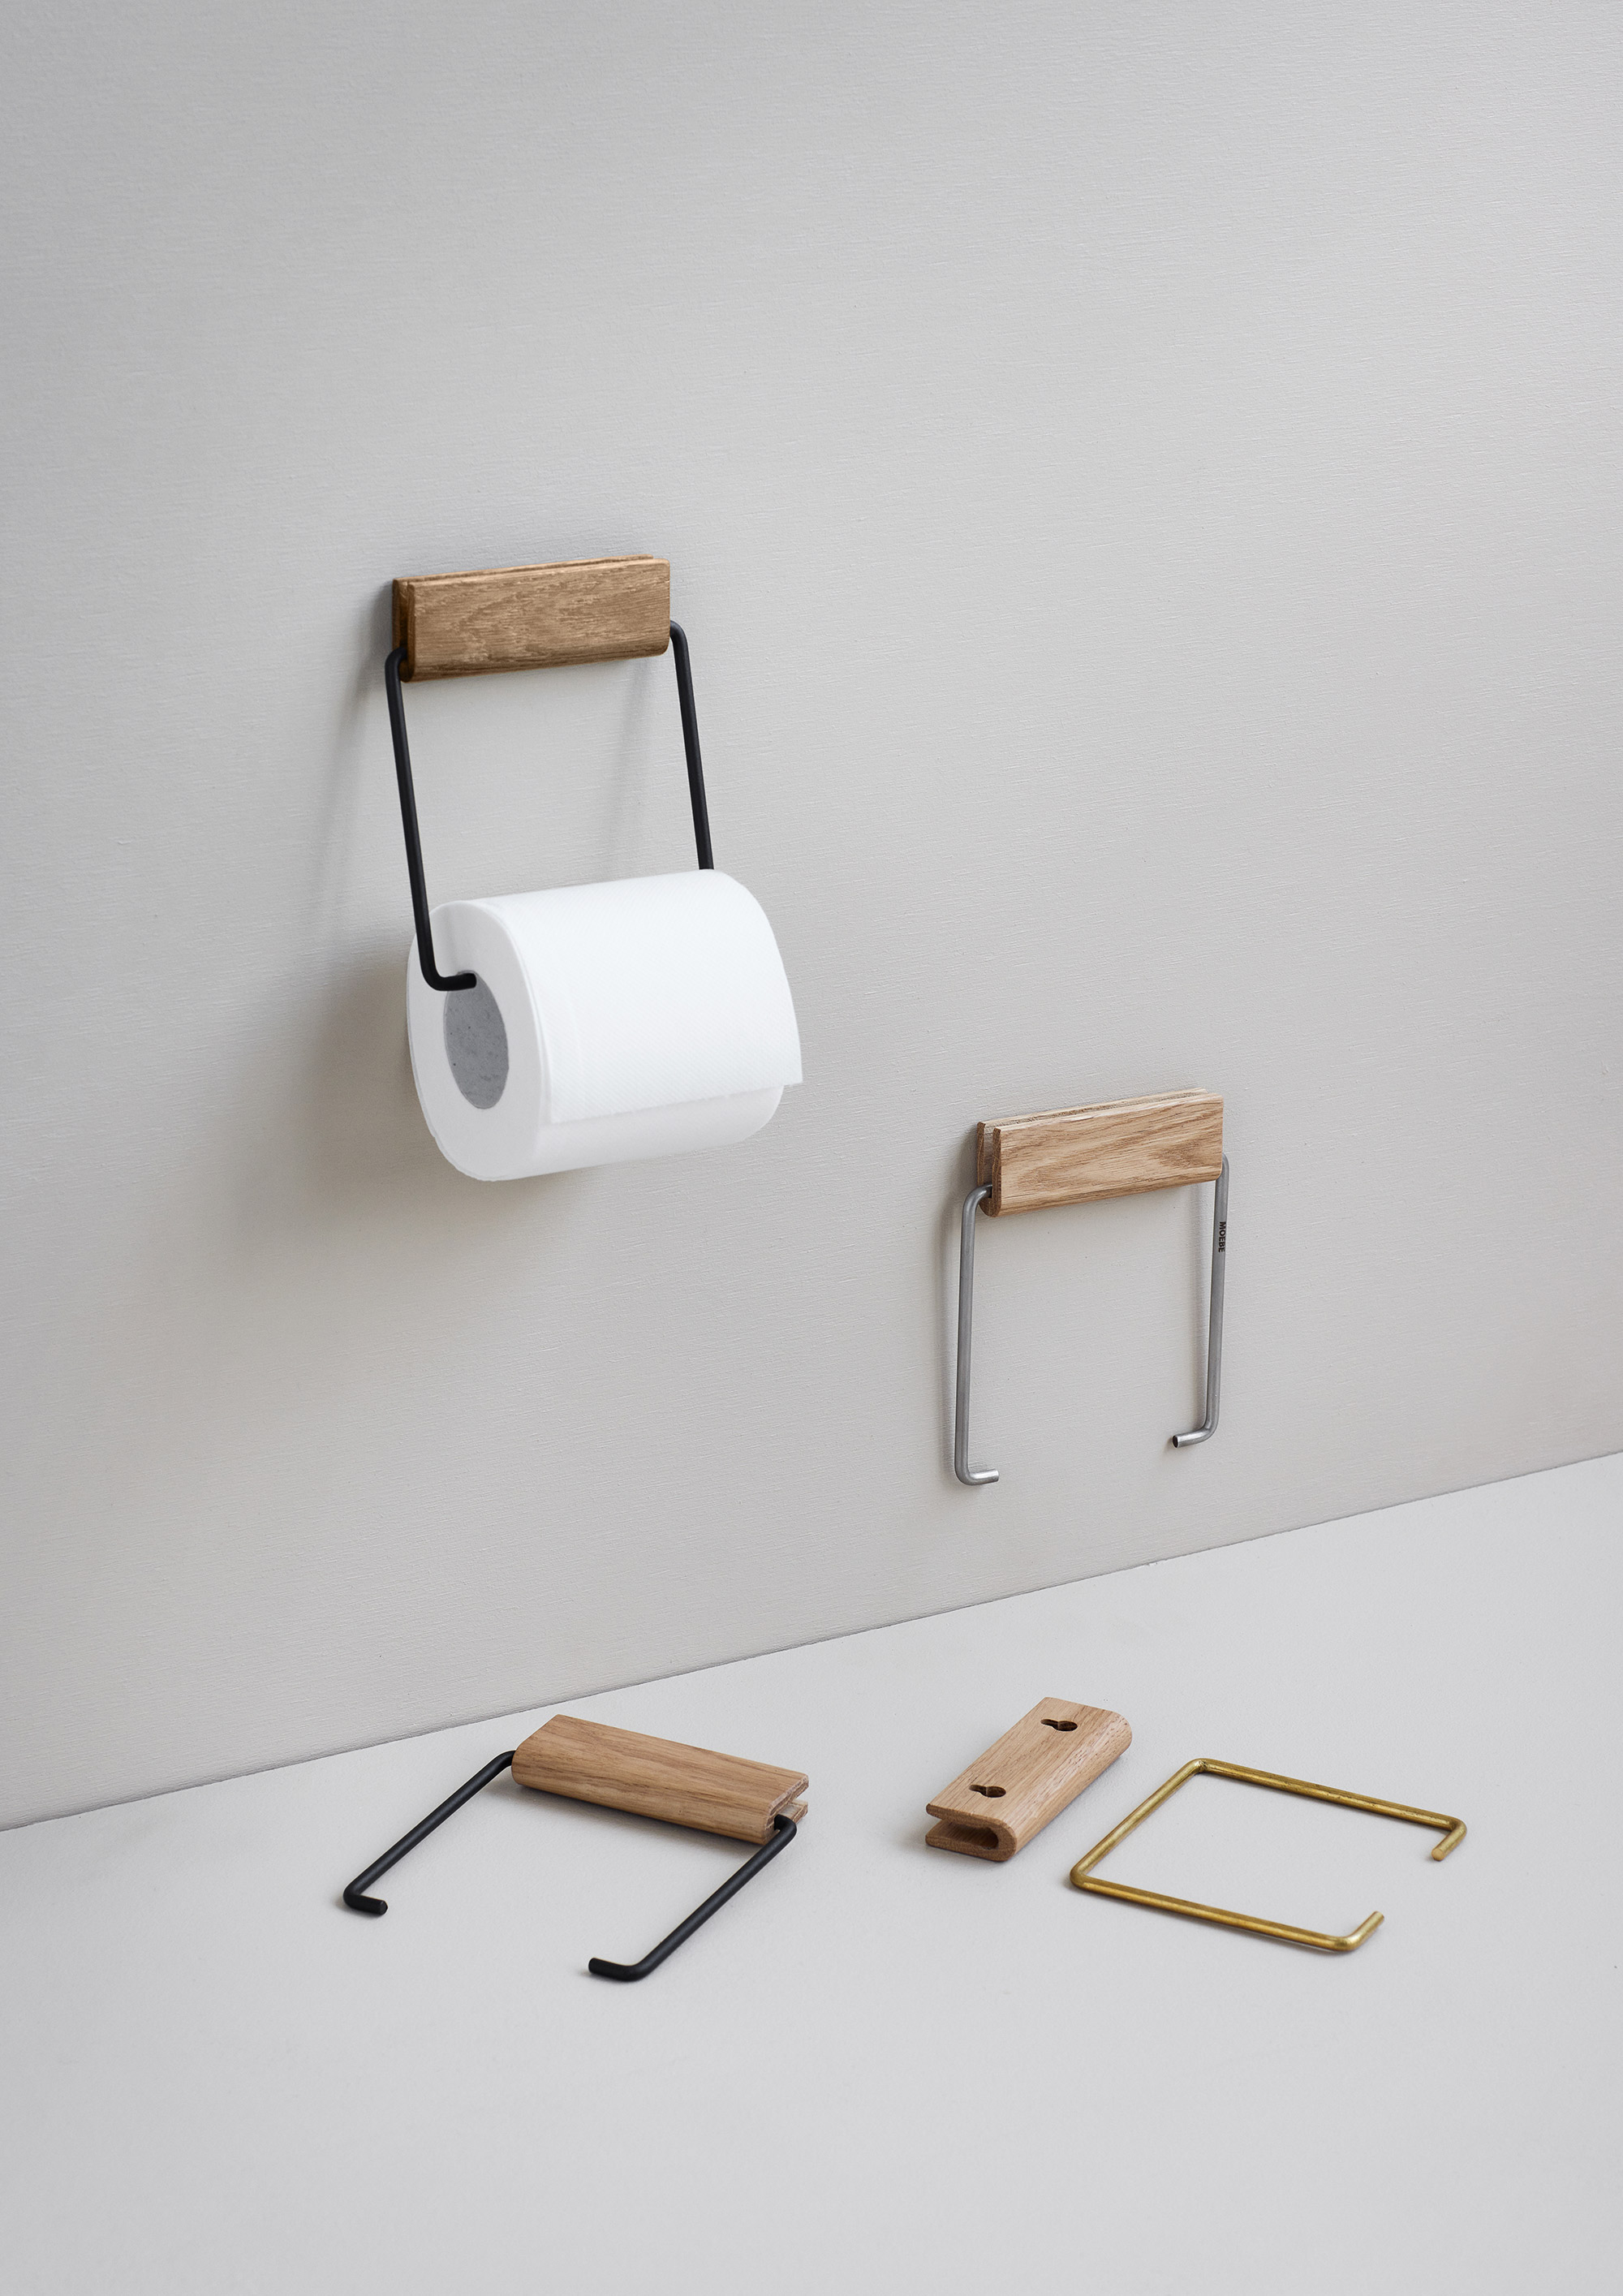 Smart and functional toilet paper holder